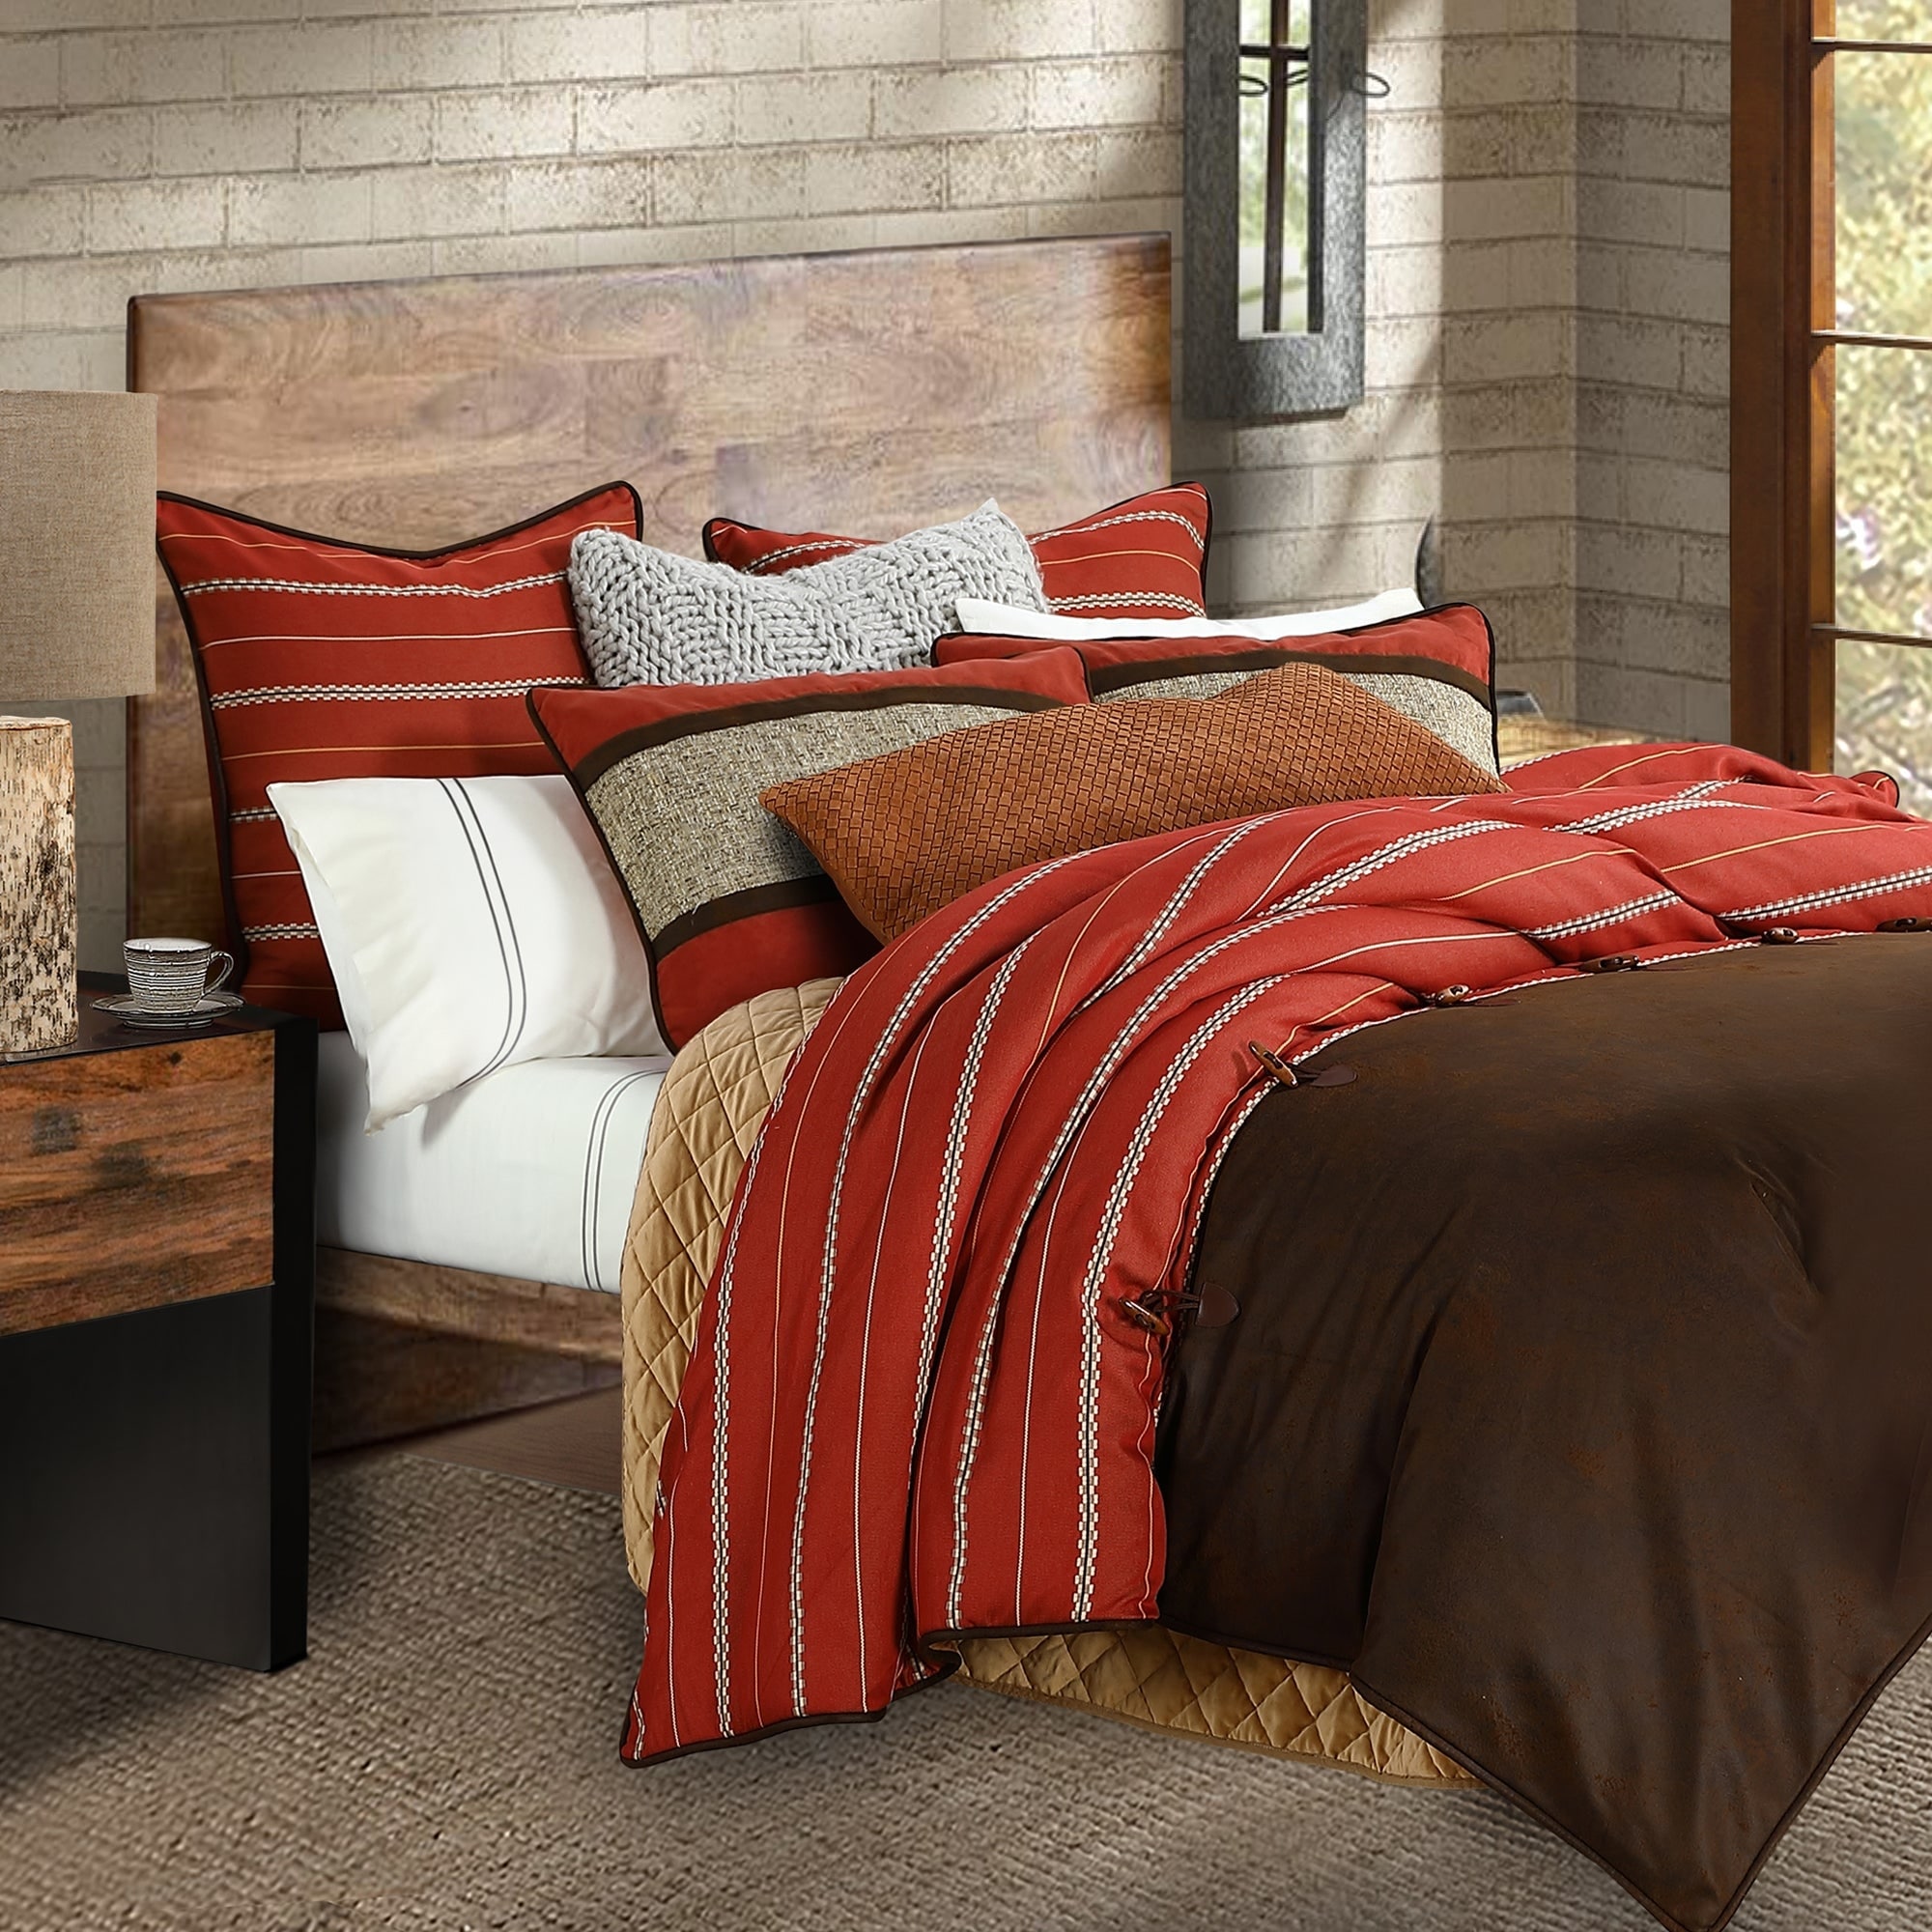 https://ak1.ostkcdn.com/images/products/is/images/direct/6f573144667efb50d4a7df8aa274cf0cc26fbd23/Paseo-Road-by-Hiend-Accents-Carter-Comforter-Set%2C-Twin%2C-2PC.jpg